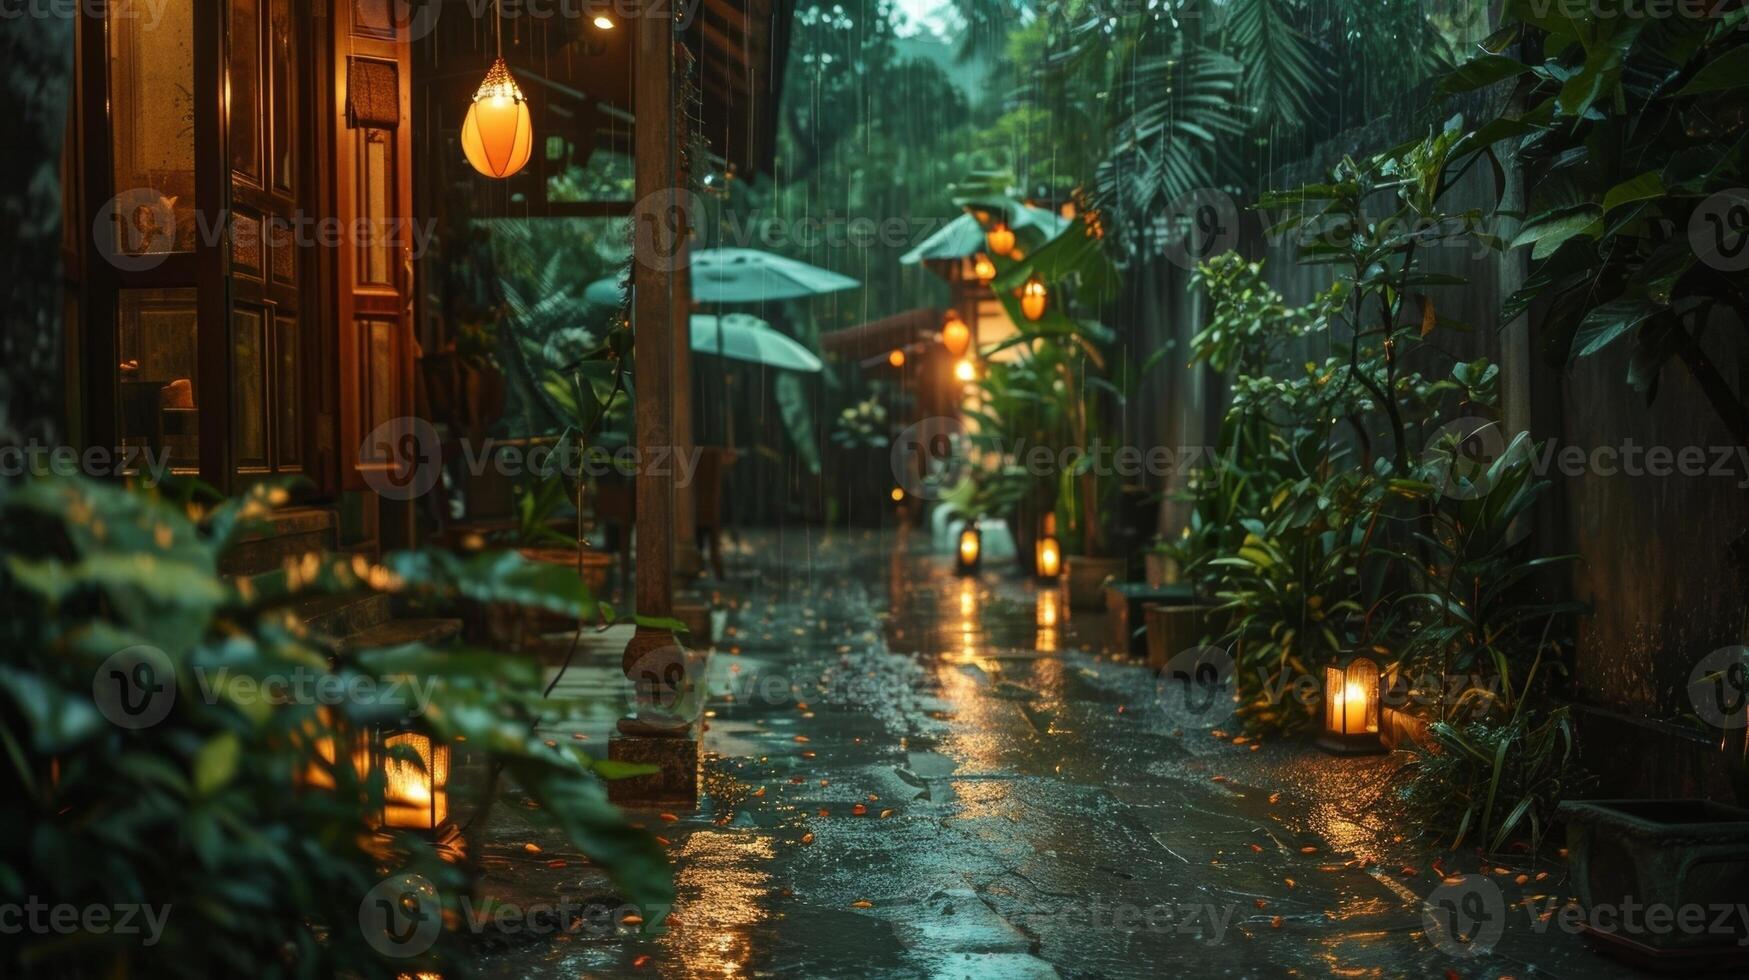 The gentle sound of rain can be heard as a light drizzle falls adding to the cozy and intimate atmosphere. 2d flat cartoon photo